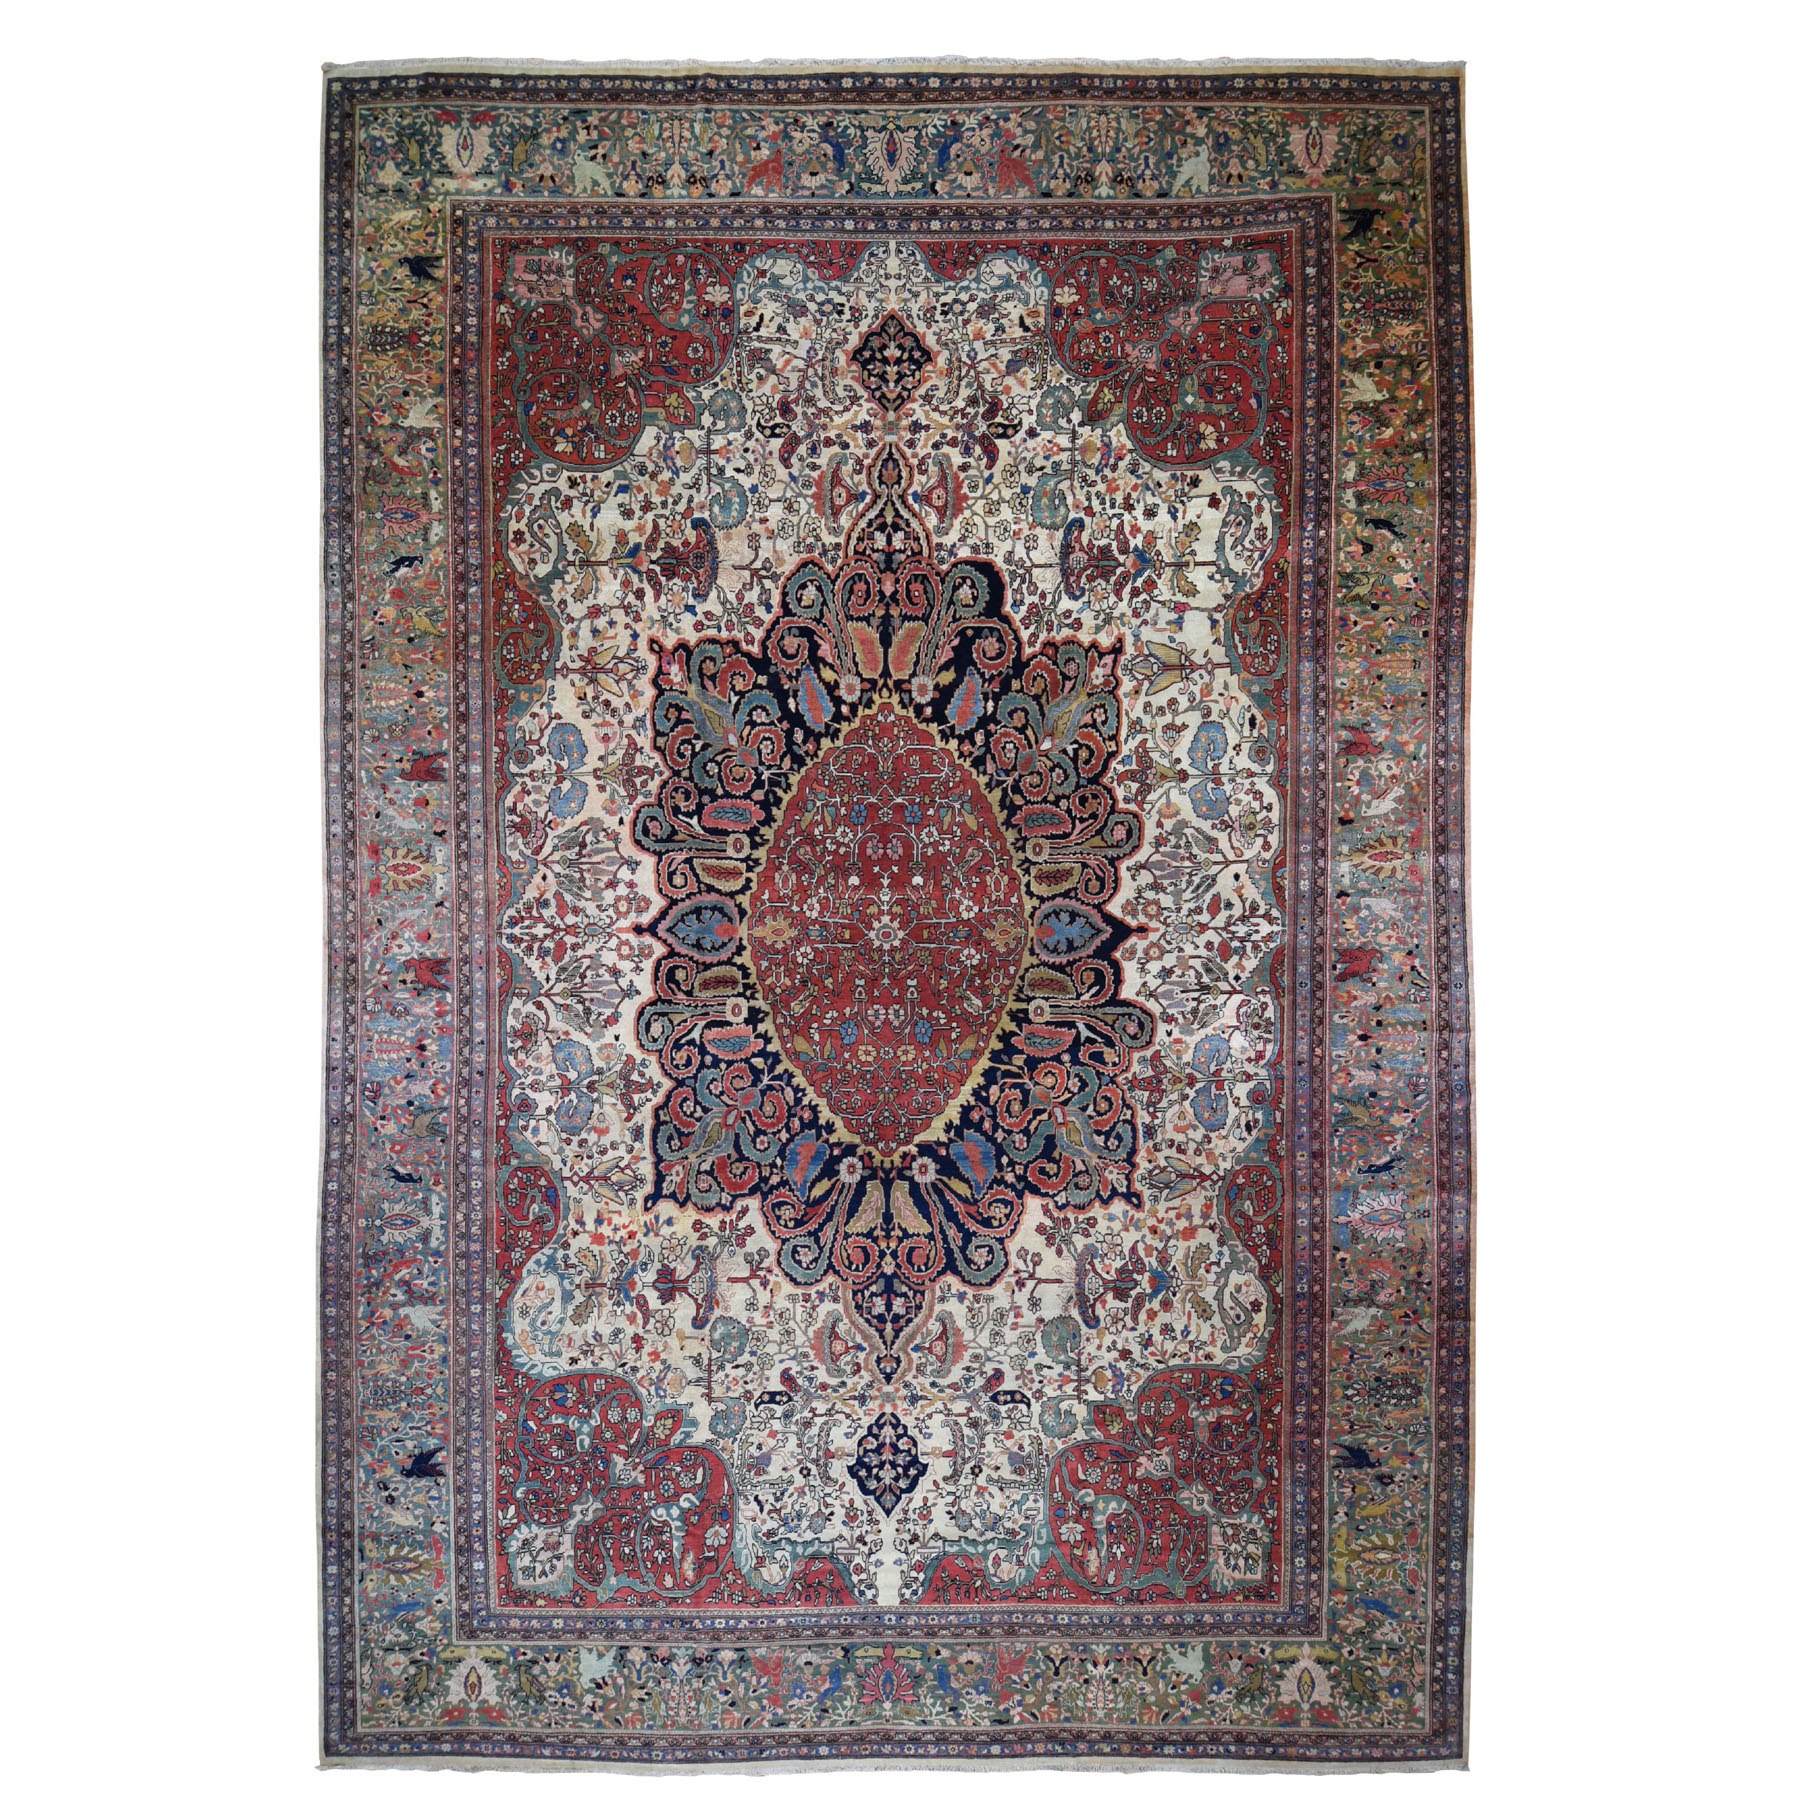 12'2"x18'8" Oversized Antique Persian Sarouk Fereghan With Birds Full Pile And Soft Hand Woven Oriental Rug 